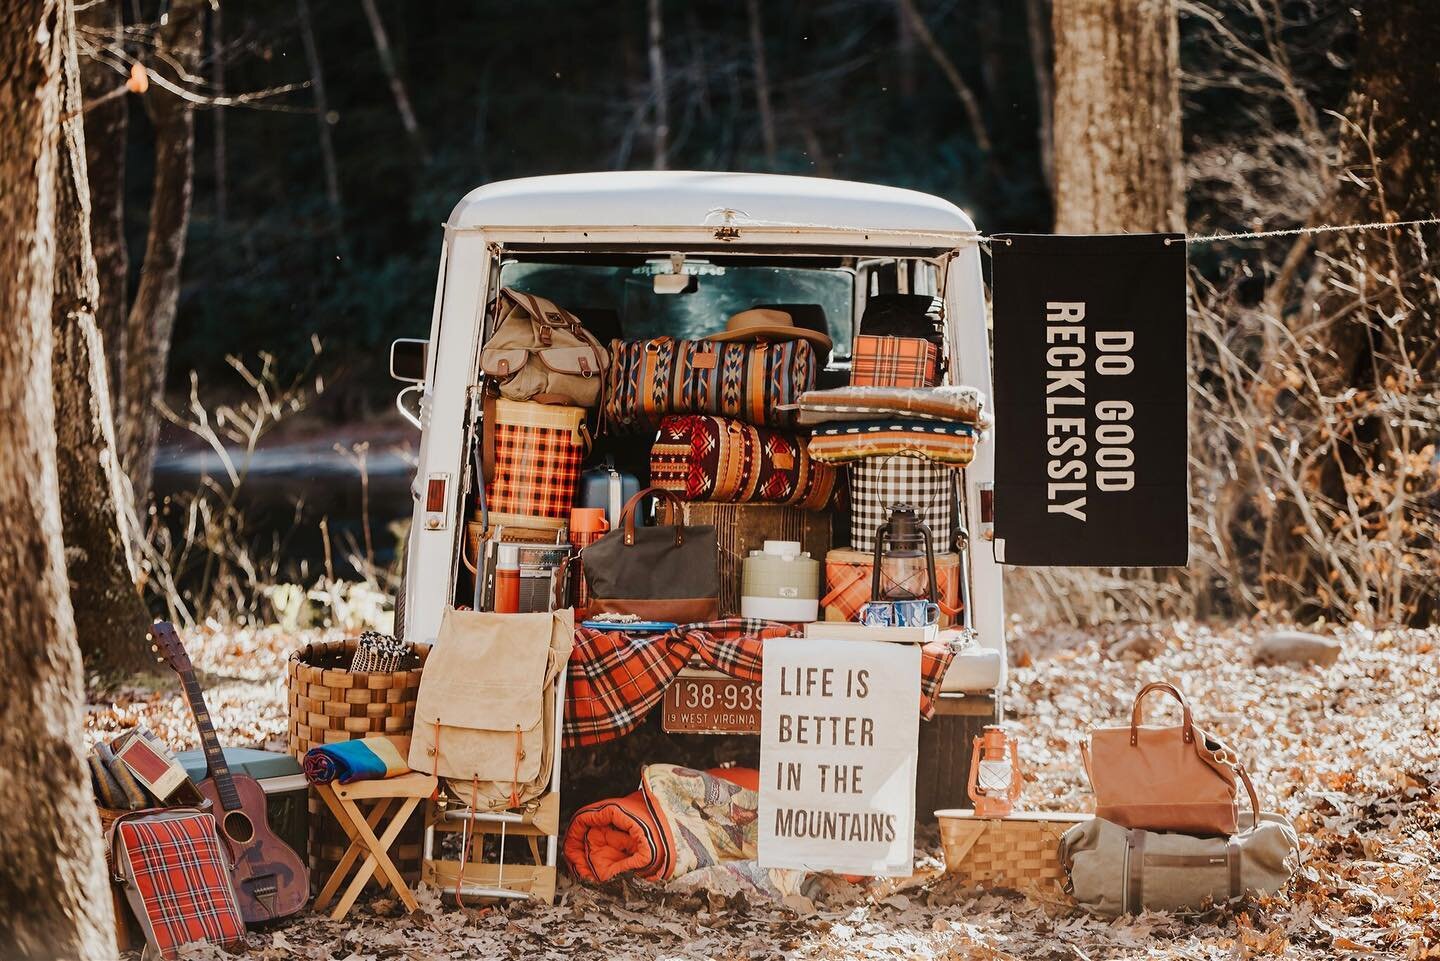 DO GOOD RECKLESSLY ✨ Life is better in the mountains. 🏔 Fresh batch of these hand painted flags in the shop! // #ellaandcompanyhome // 📷:@thegrays #wvtourism #countrylivingmagazine #llbean #thomaswv